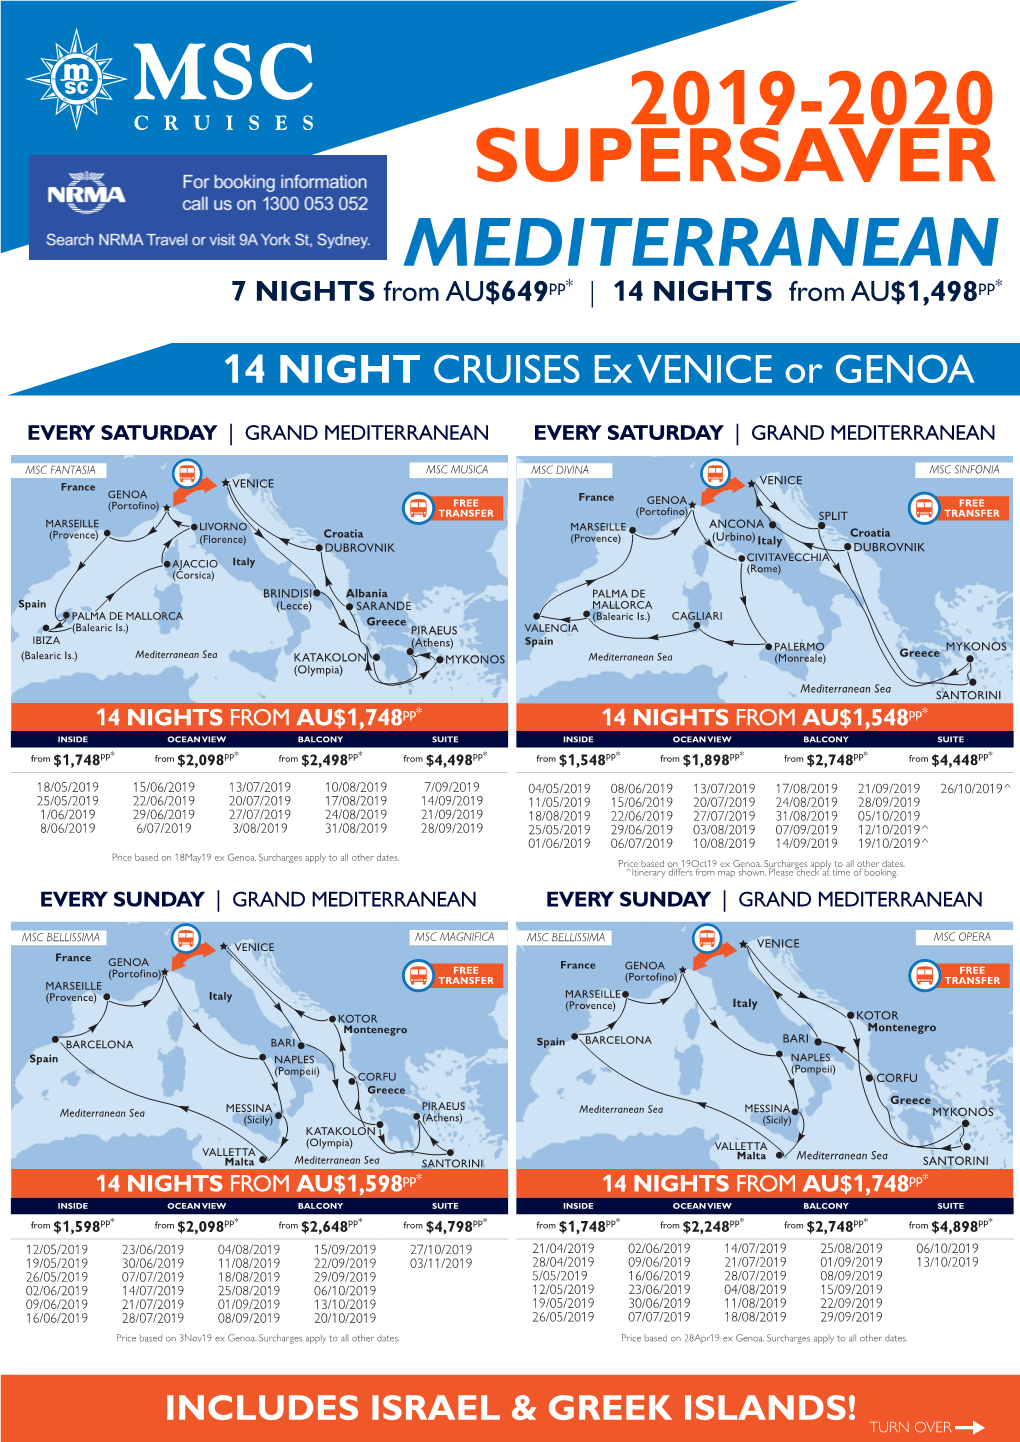 2019-2020 SUPERSAVER MEDITERRANEAN 7 NIGHTS from AU$649Pp* | 14 NIGHTS from AU$1,498Pp*